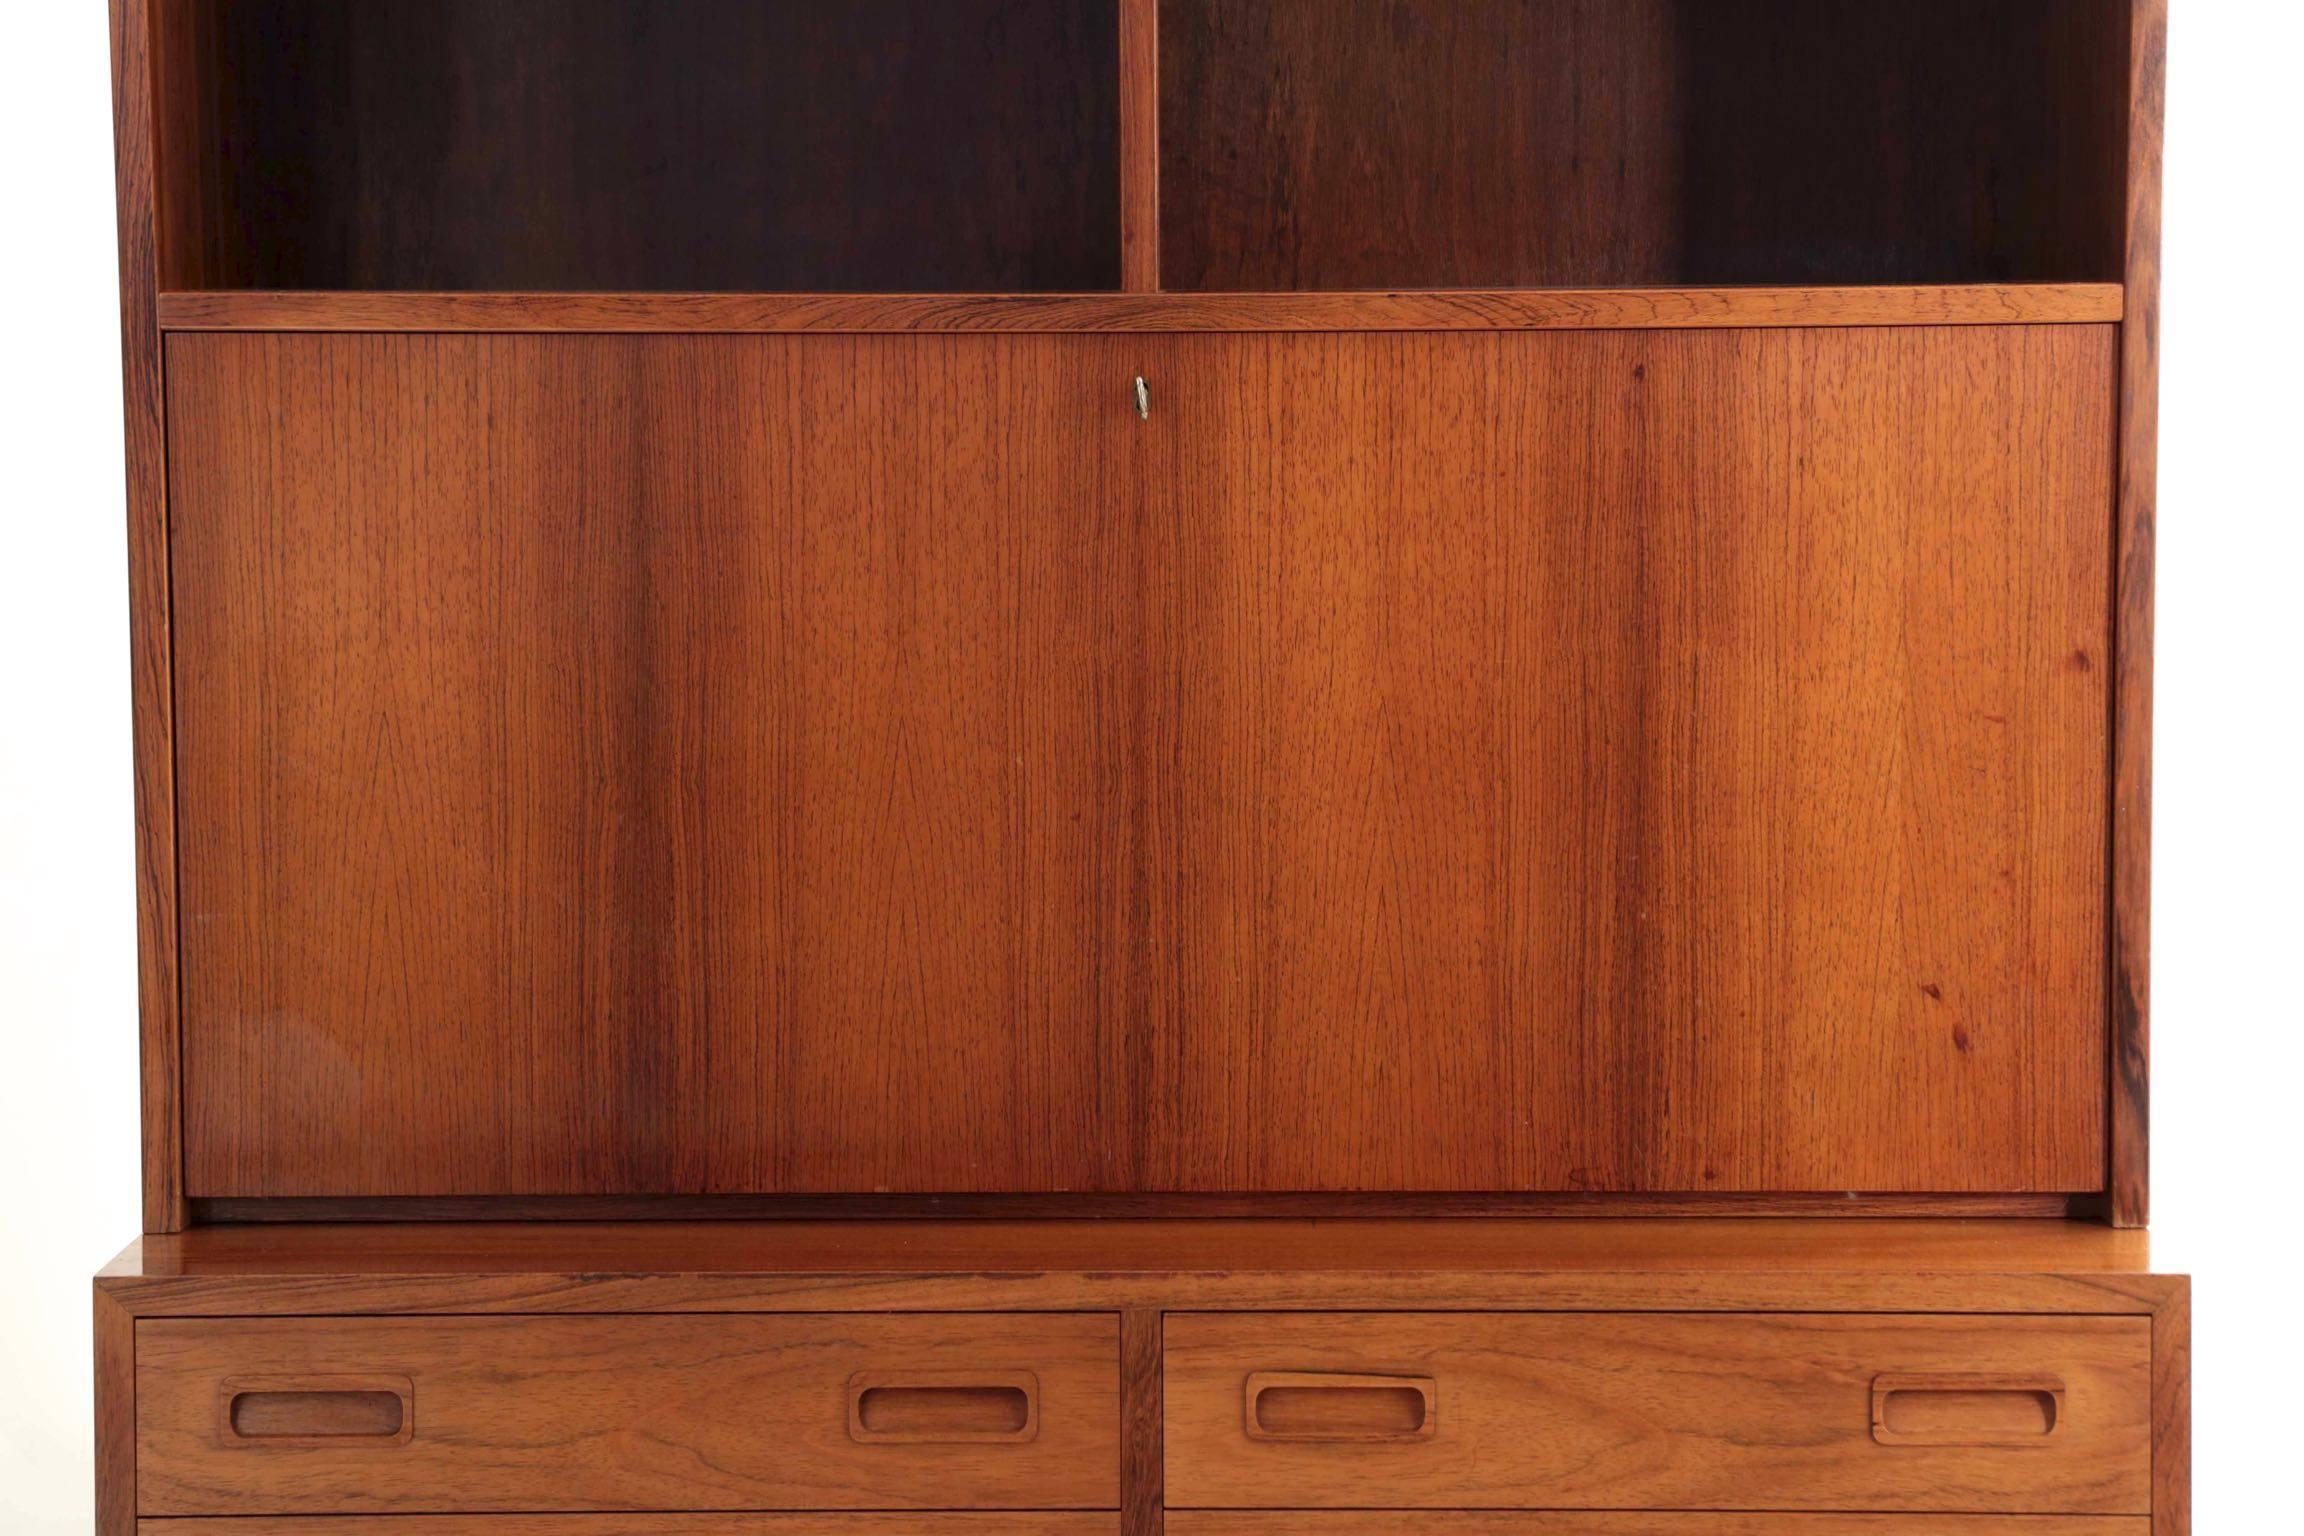 20th Century Danish Midcentury Rosewood Wall Unit Desk over Dresser by Poul Hundevad